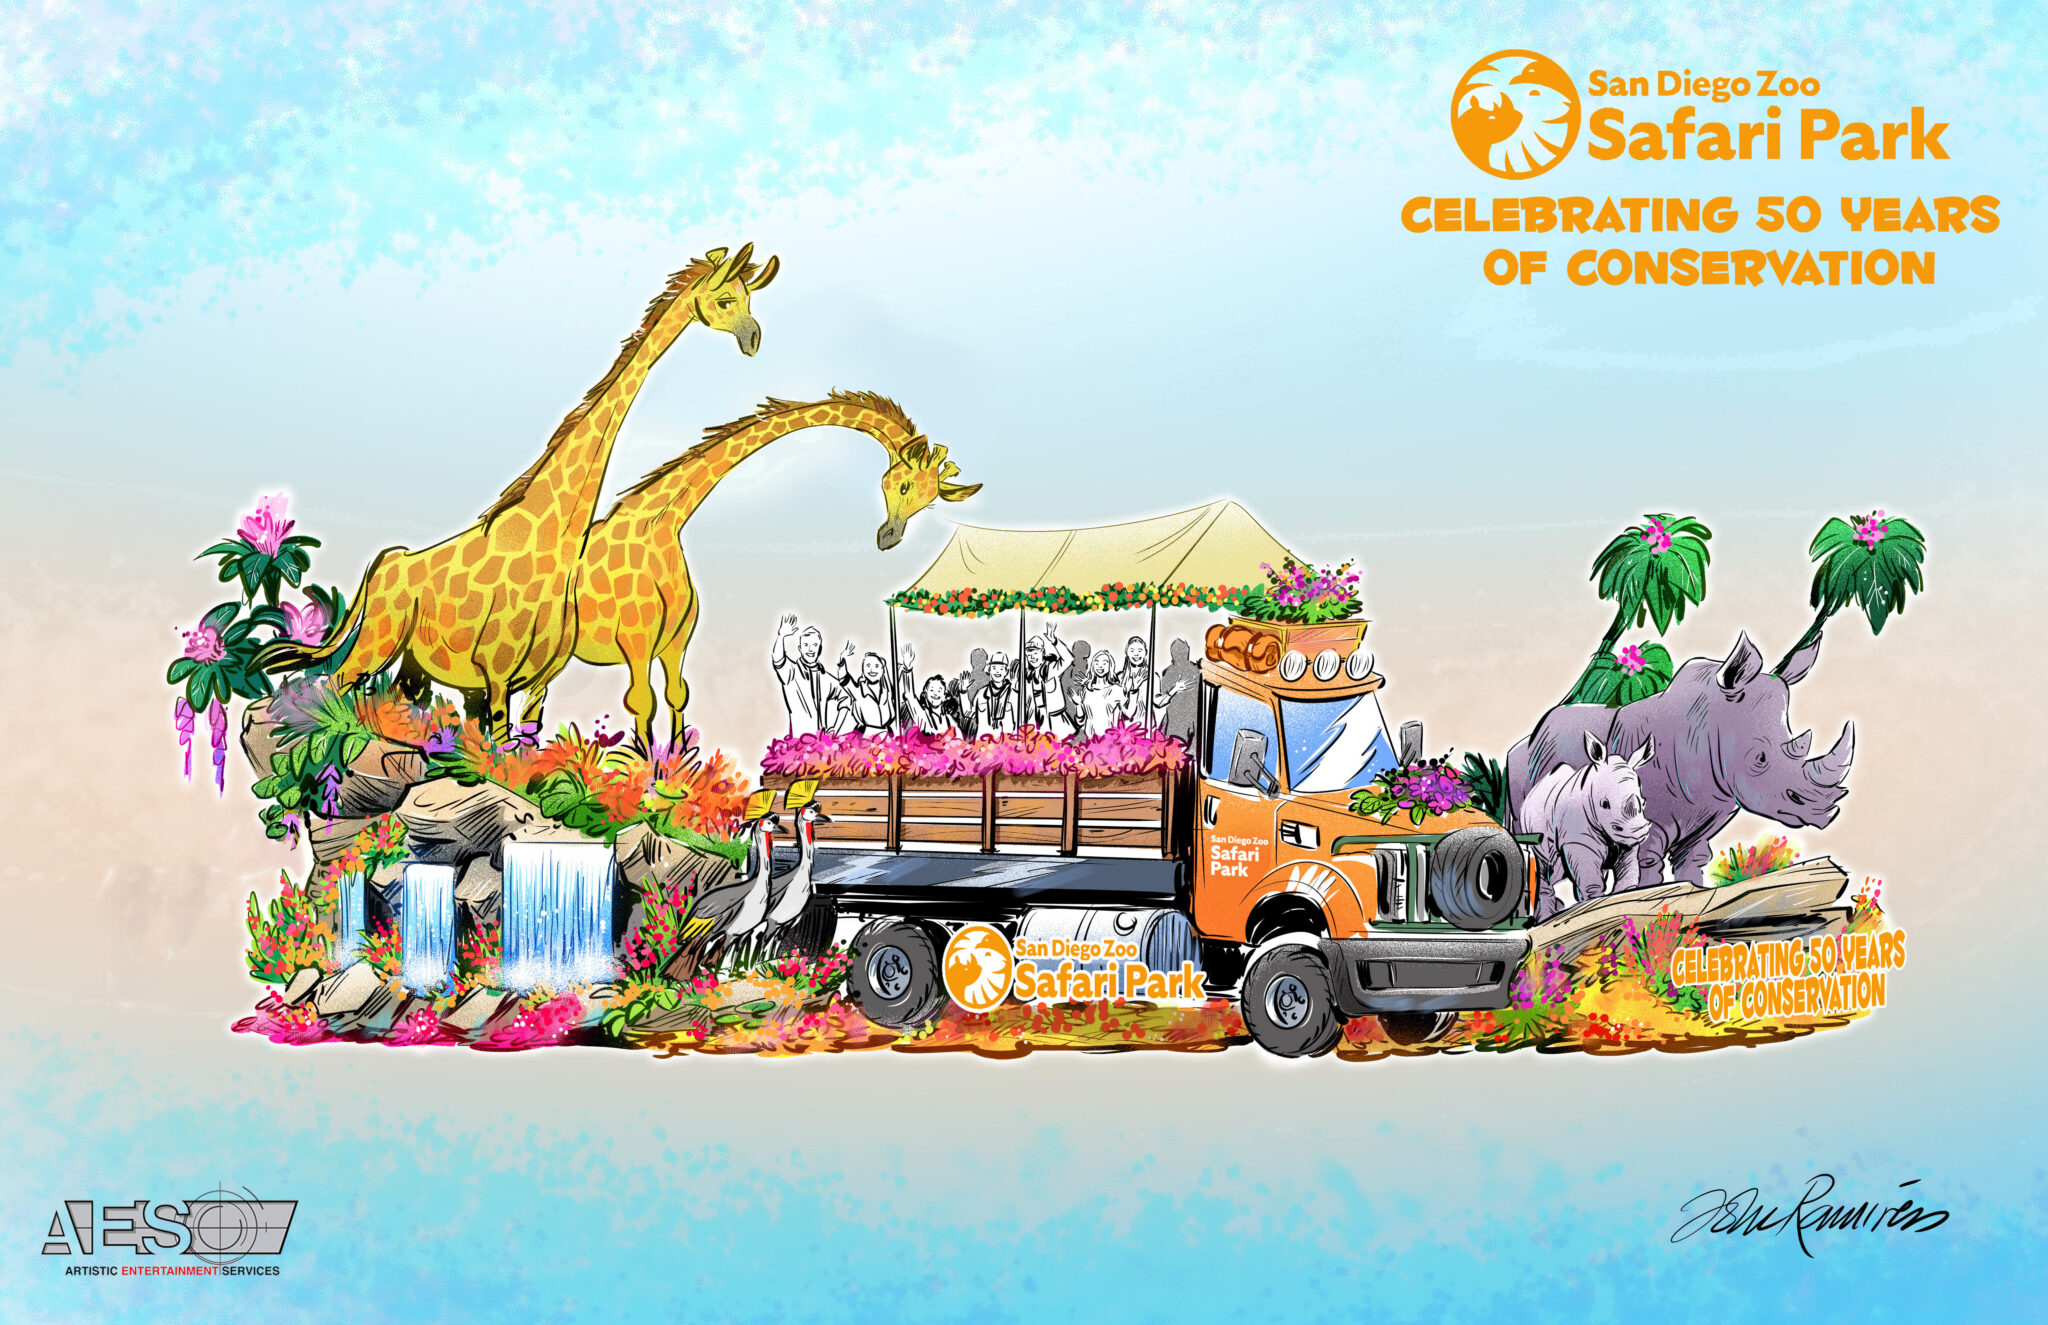 San Diego Zoo Safari Park Celebrates 50th Anniversary with Float in the